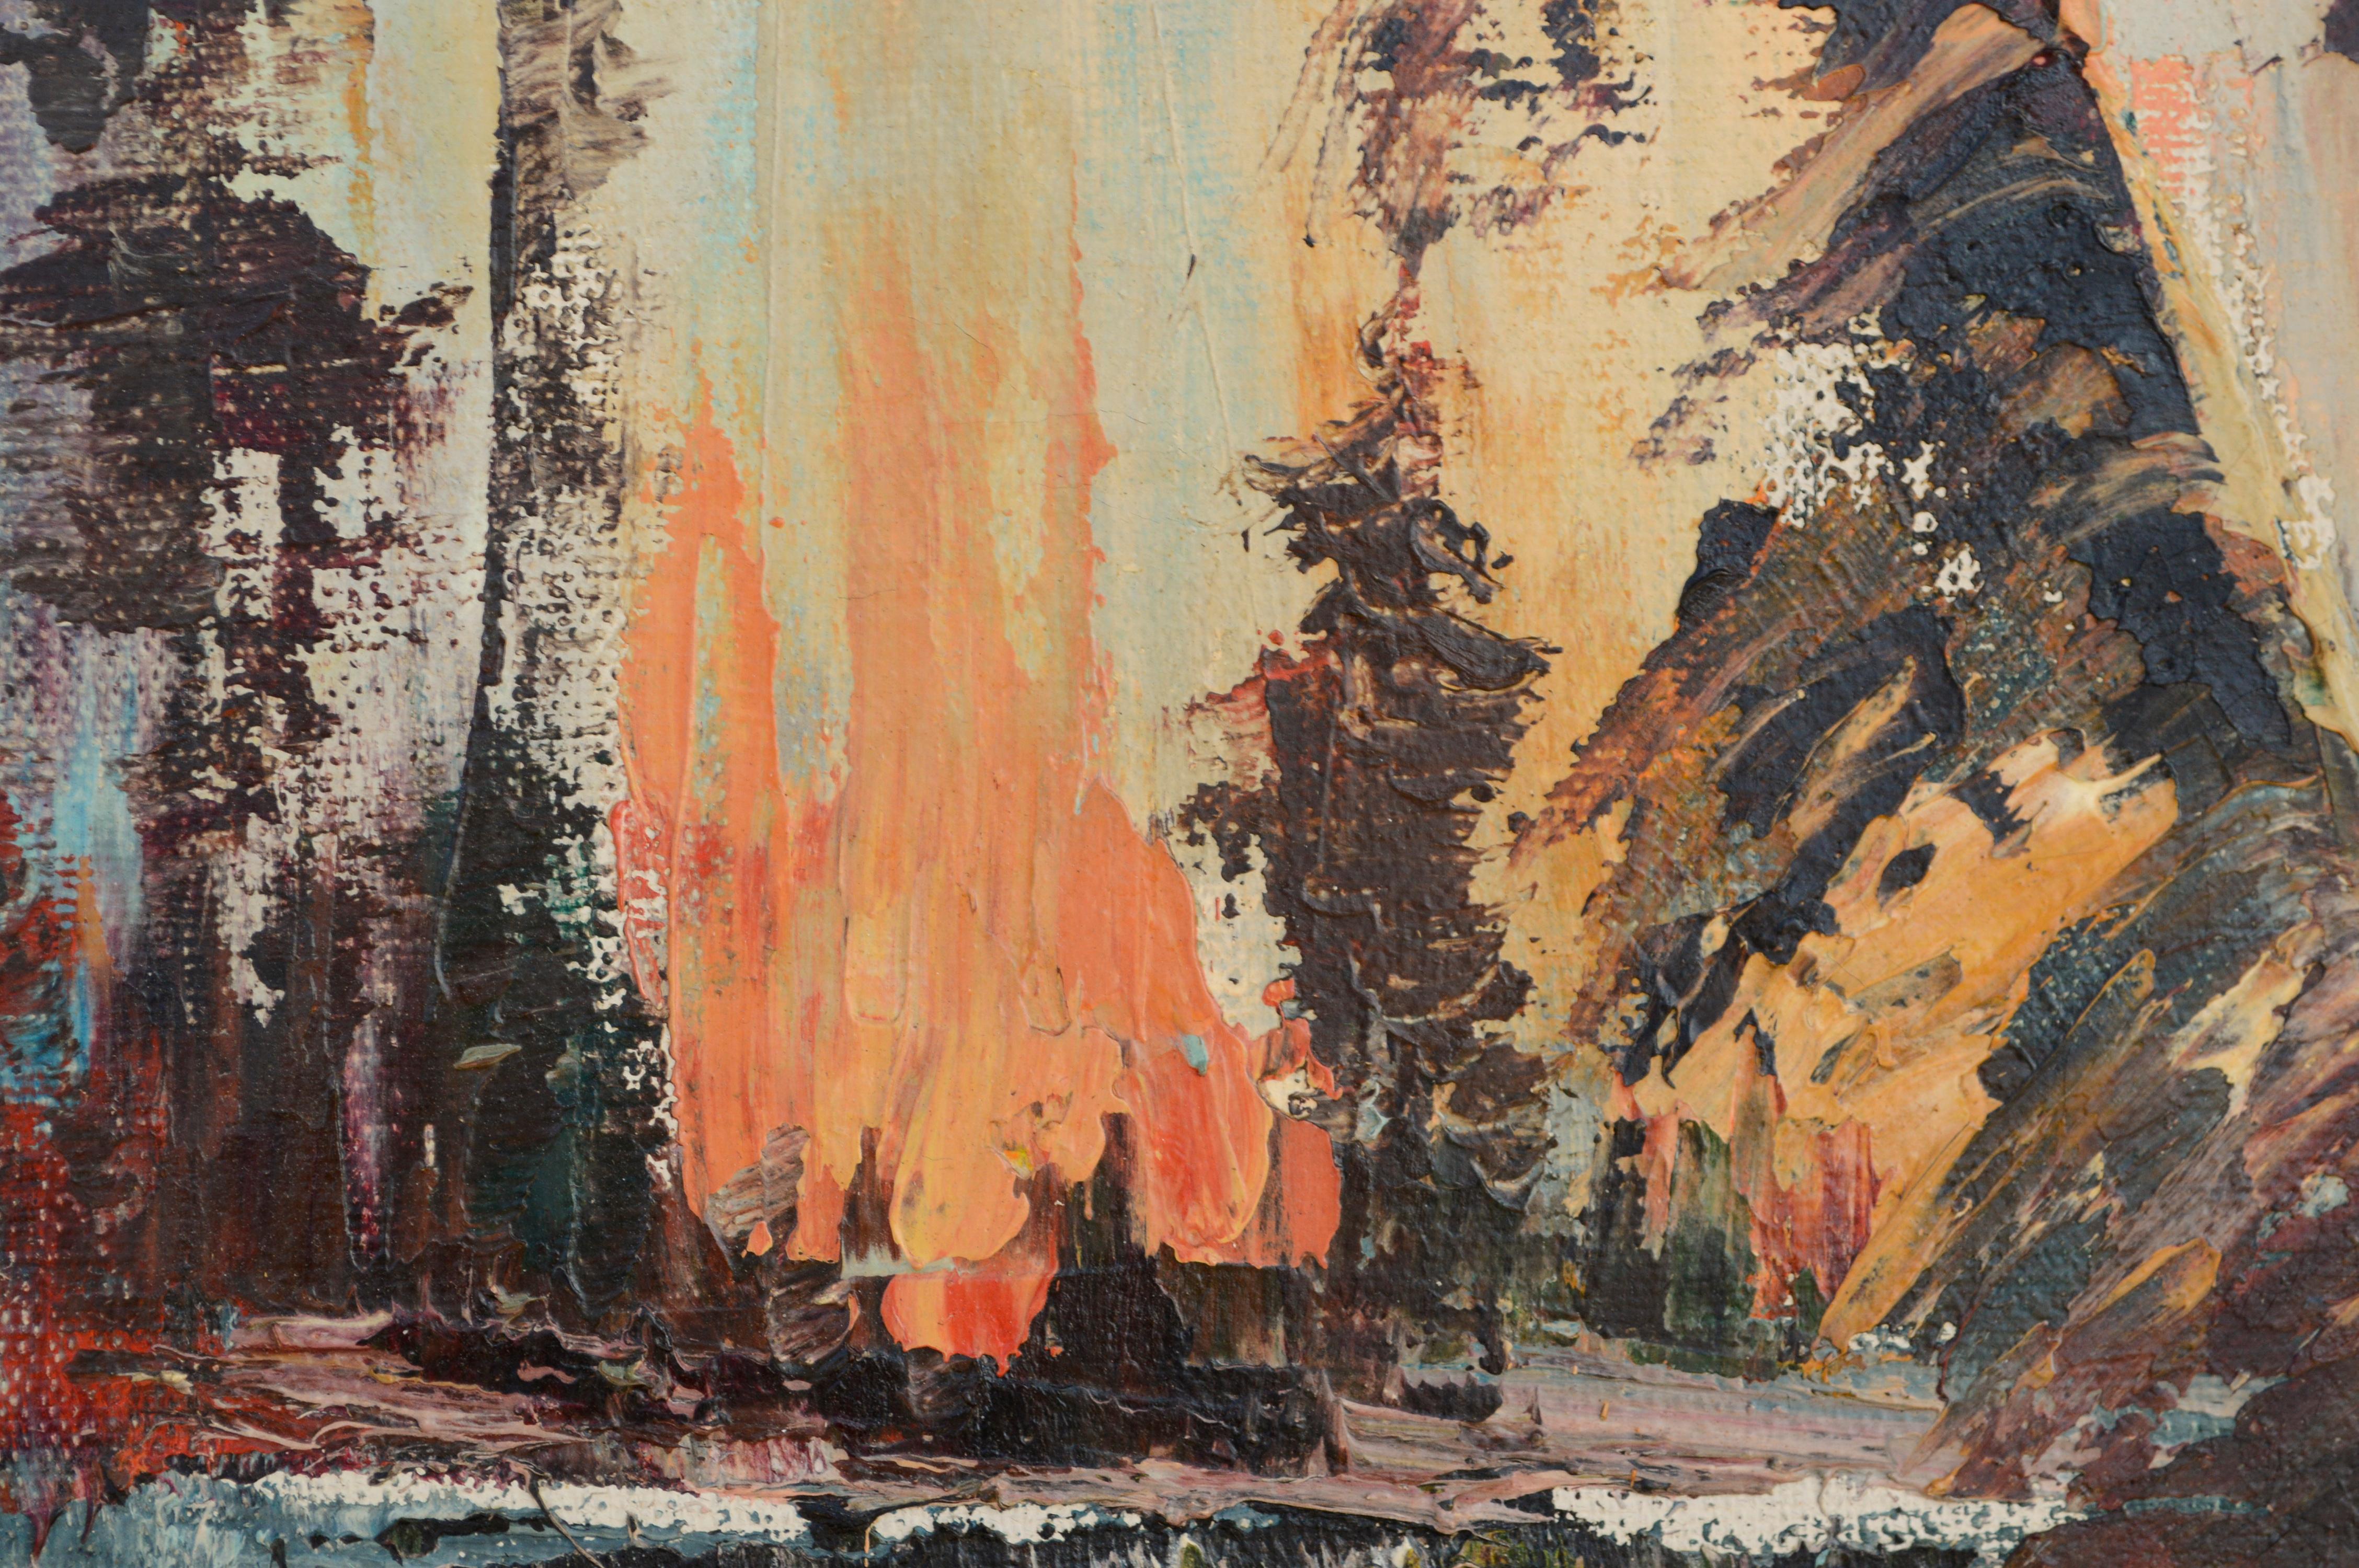 The Approaching Fire - Landscape - American Impressionist Painting by Gordon